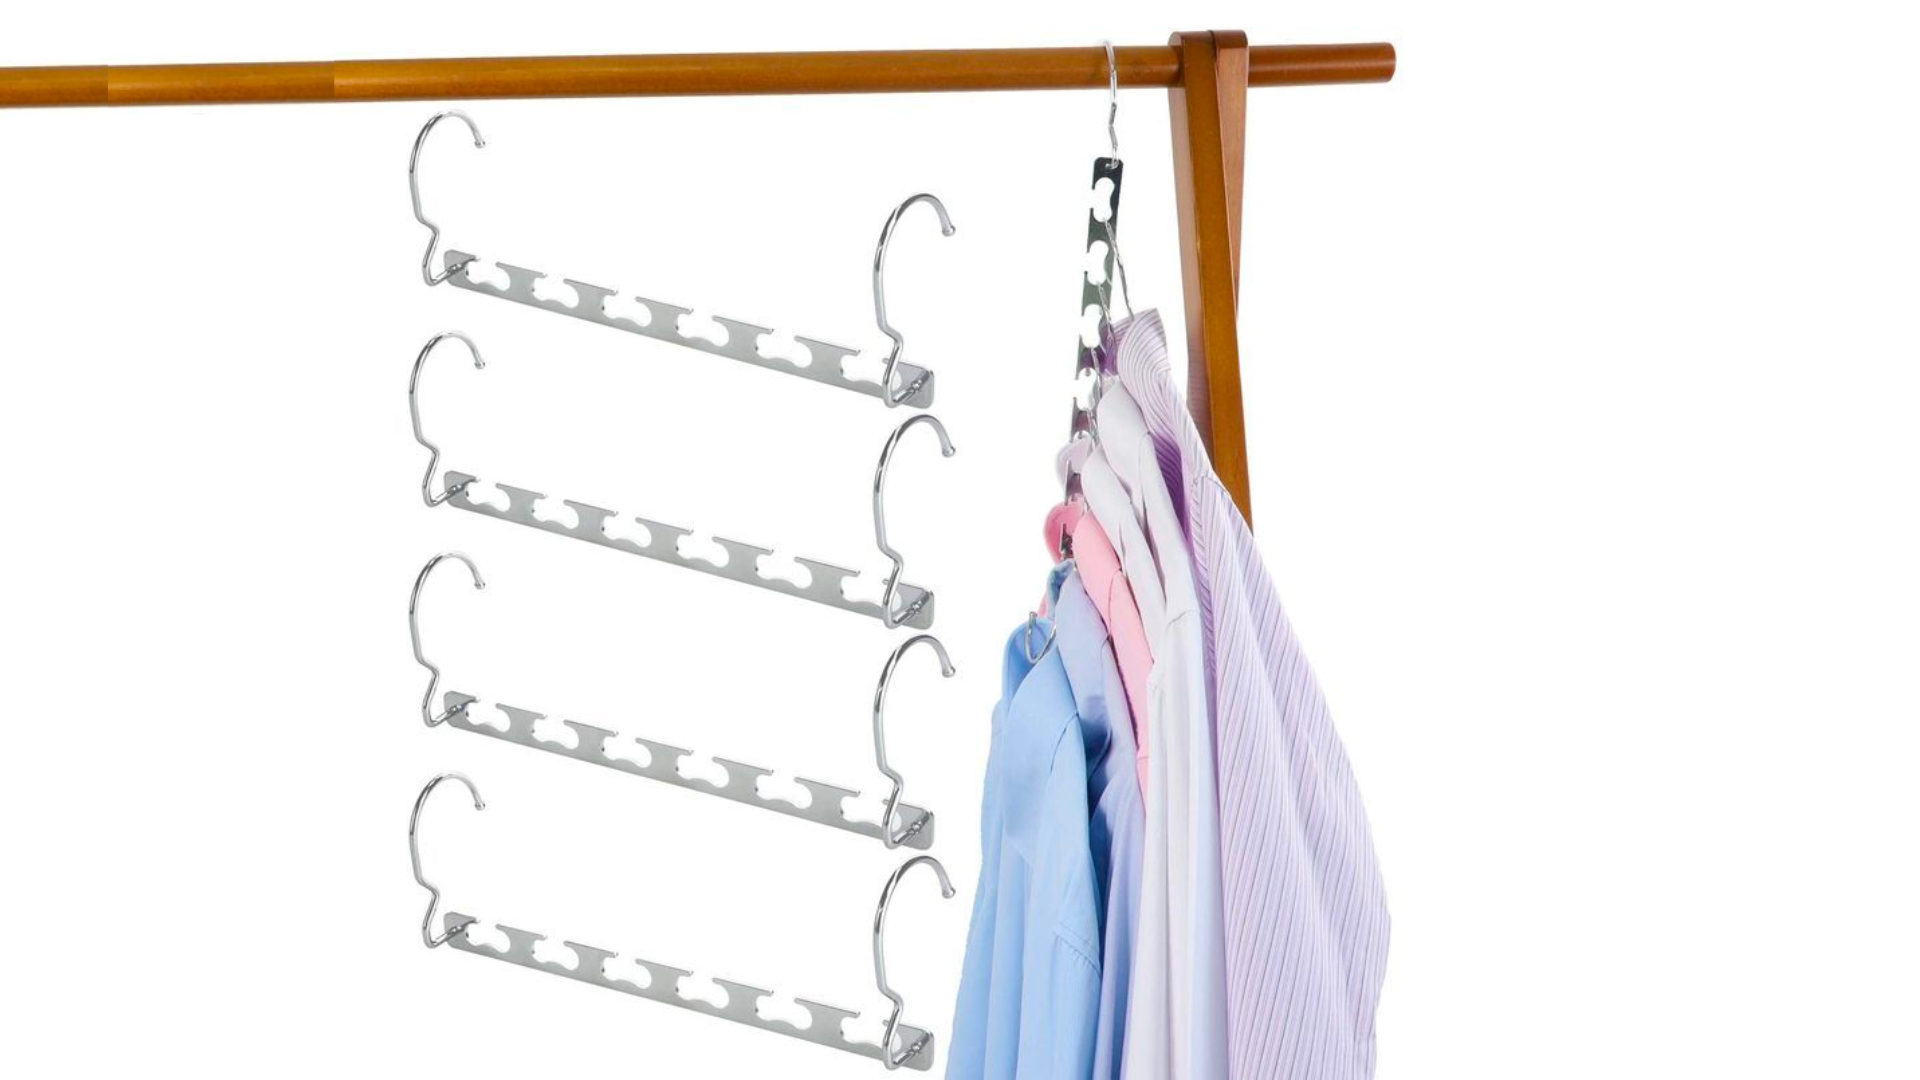  Three wonder hooks in the middle of the image. One wonder hook attached to a clothing rack, with shirts on hangers hanging from the hooks vertically.